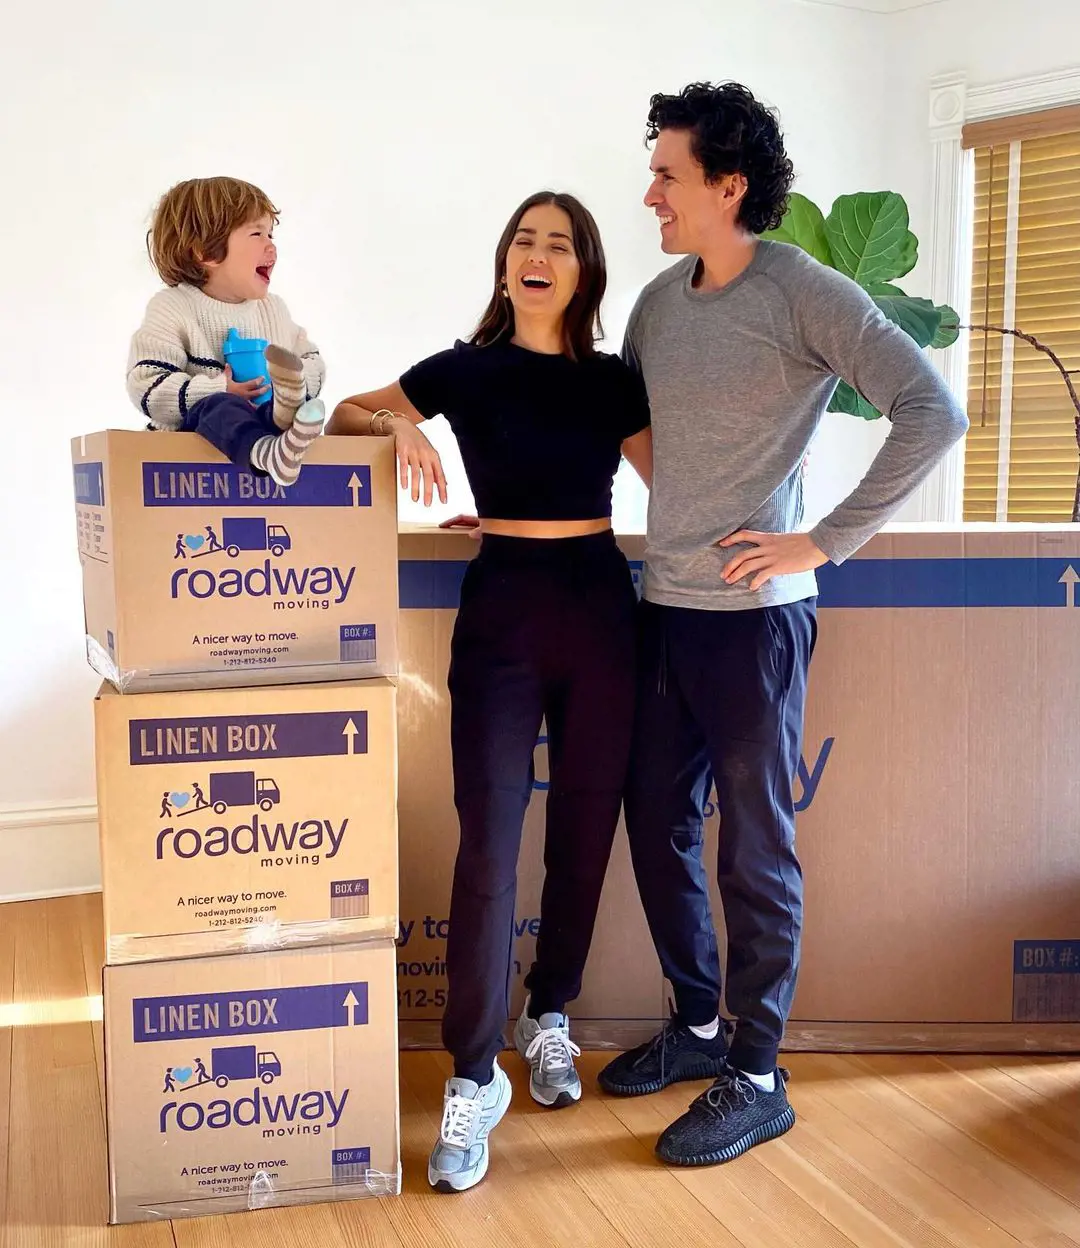 Paola Alberdi family moved to Miami from San Diego through the help of 'roadwaymoving' company.